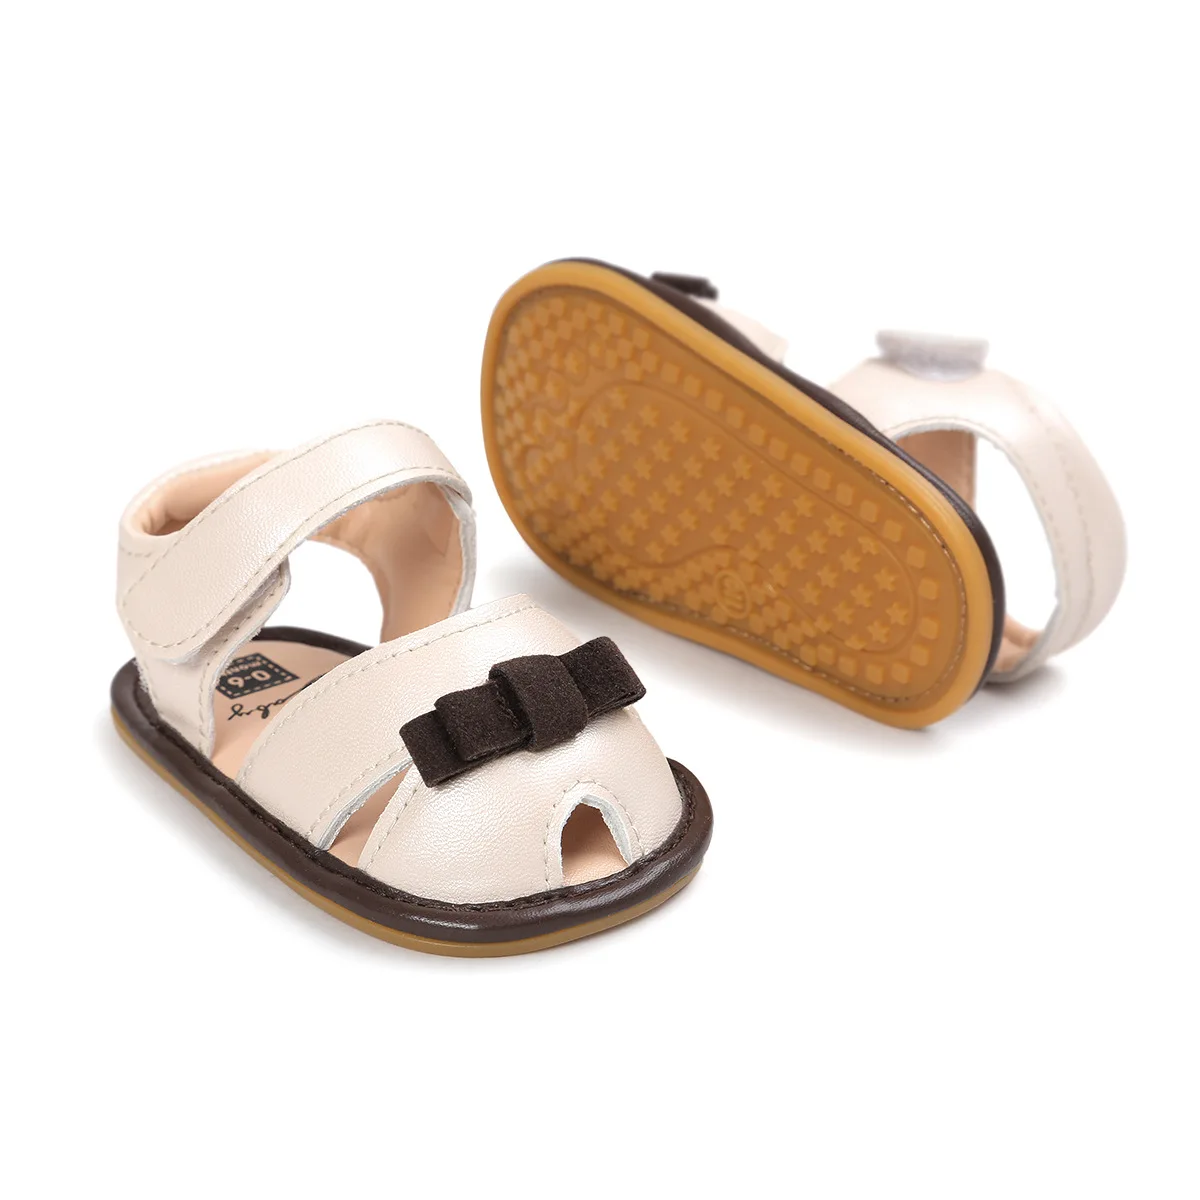 New style fashion PU leather Rubber sole outdoor barefoot Newborn baby girl sandals 2year